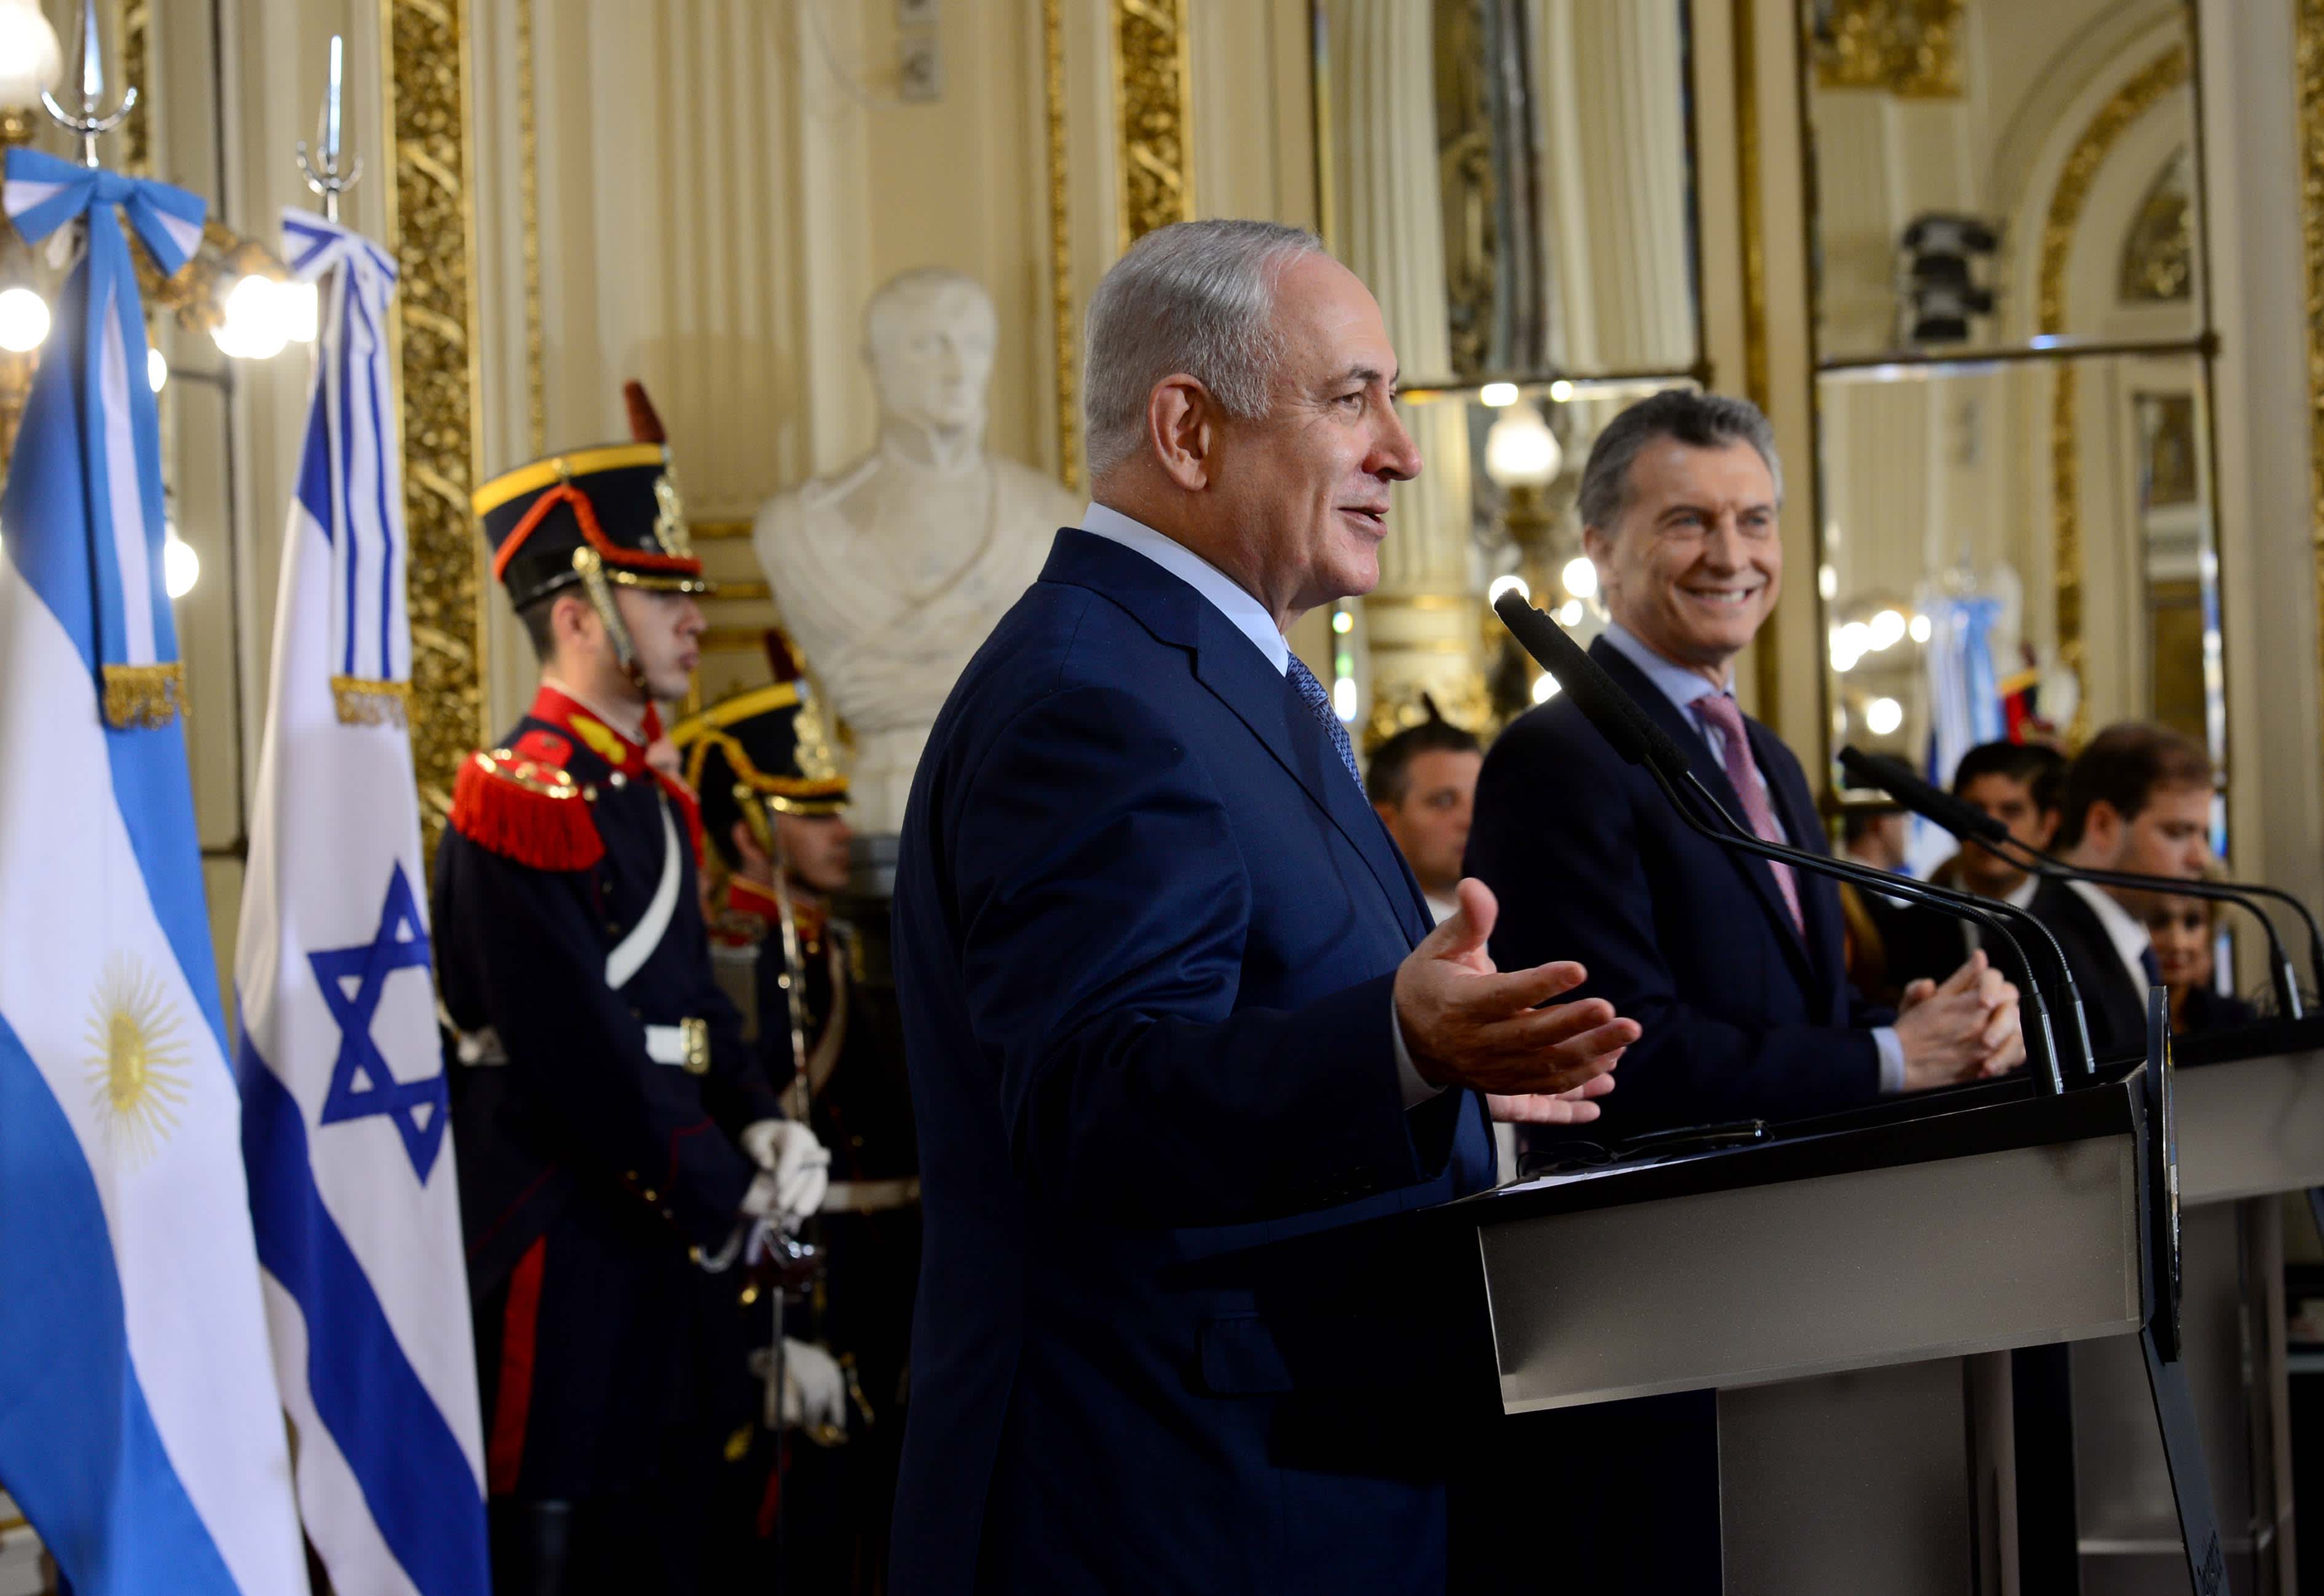 Prime Minister Benjamin Netanyahu speaking at the House of the Argentinian president in Buenos Aires, September 12, 2017. (Avi Ohayon/GPO)